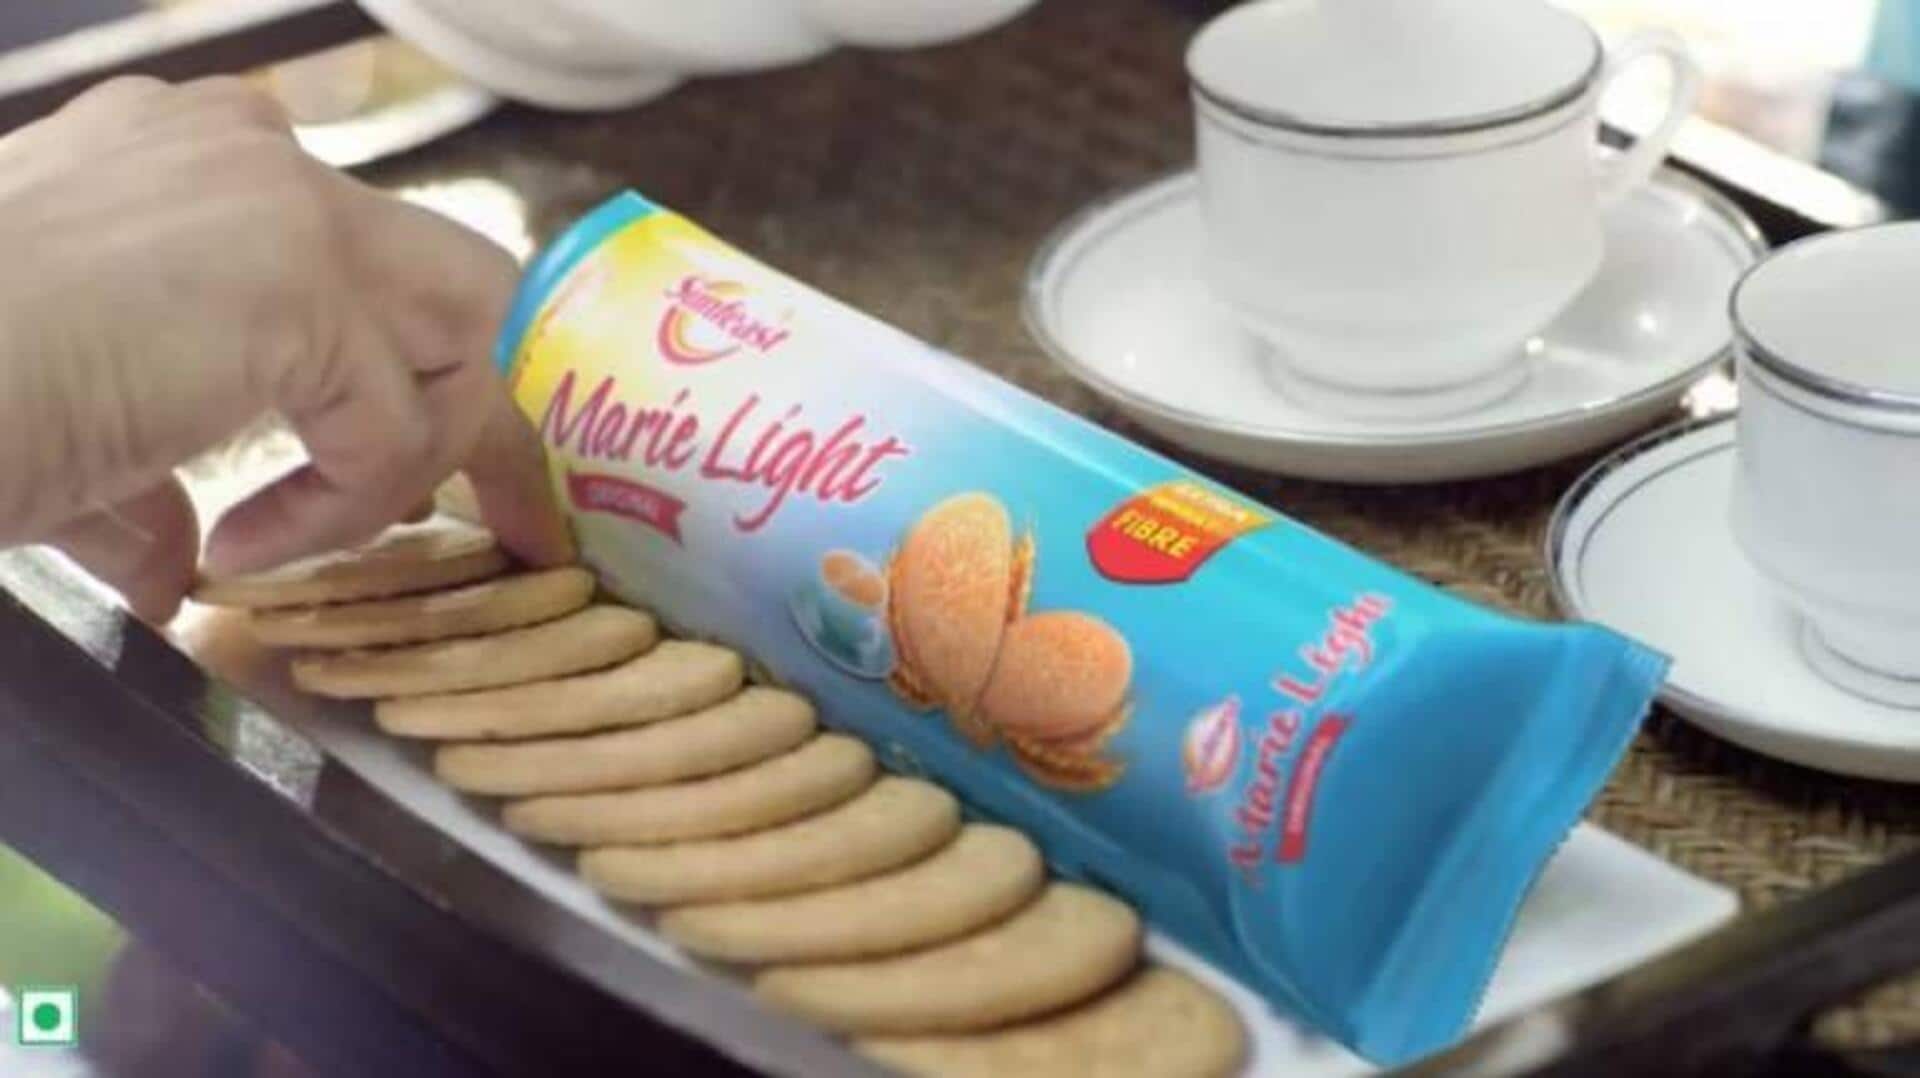 ITC fined Rs. 1 lakh for packaging one less biscuit